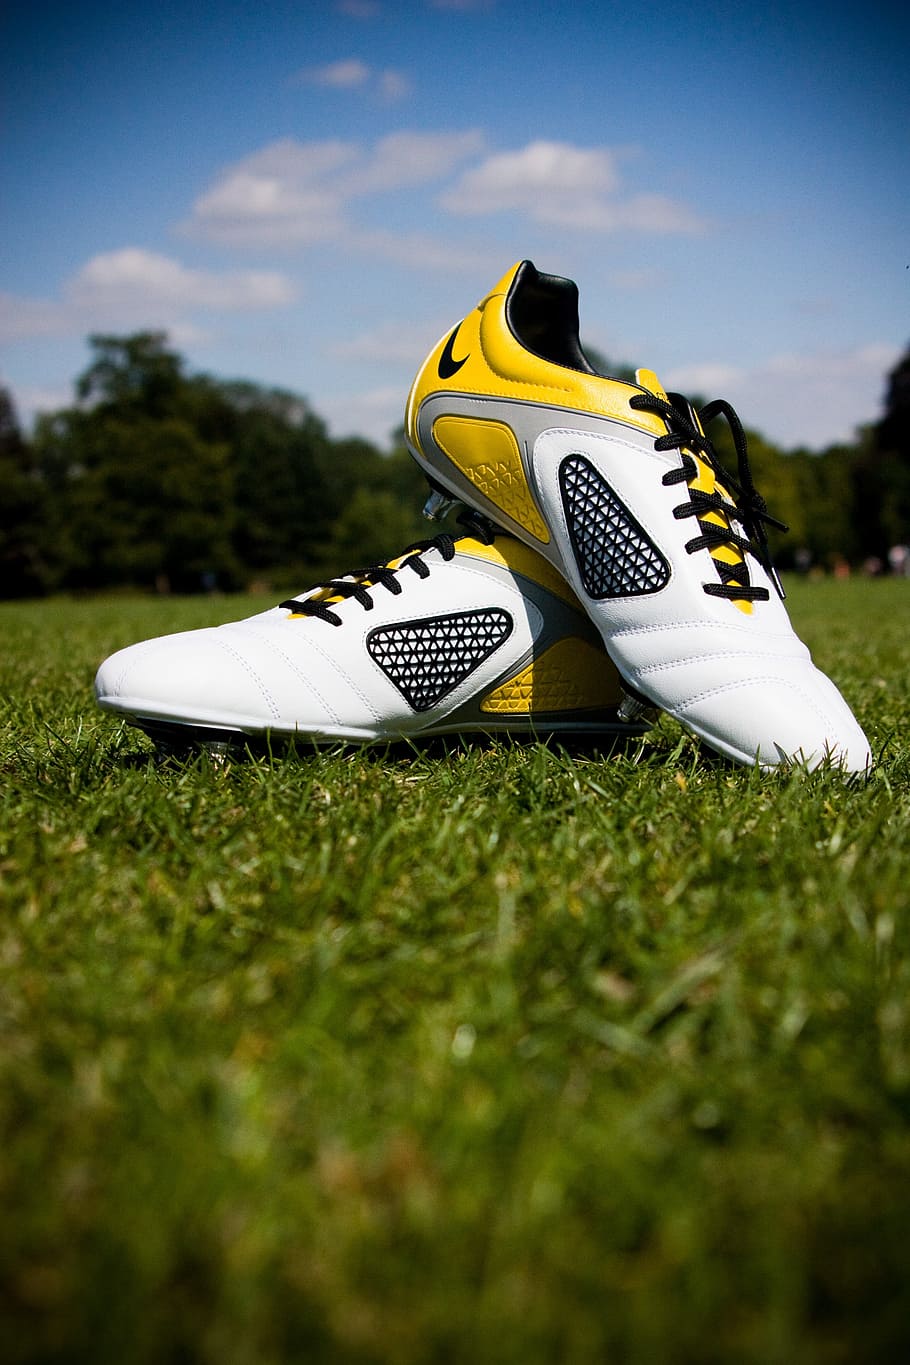 pair, white-and-yellow nike soccer cleats, field, daytime, football, boots, shoes, sport, grass, park